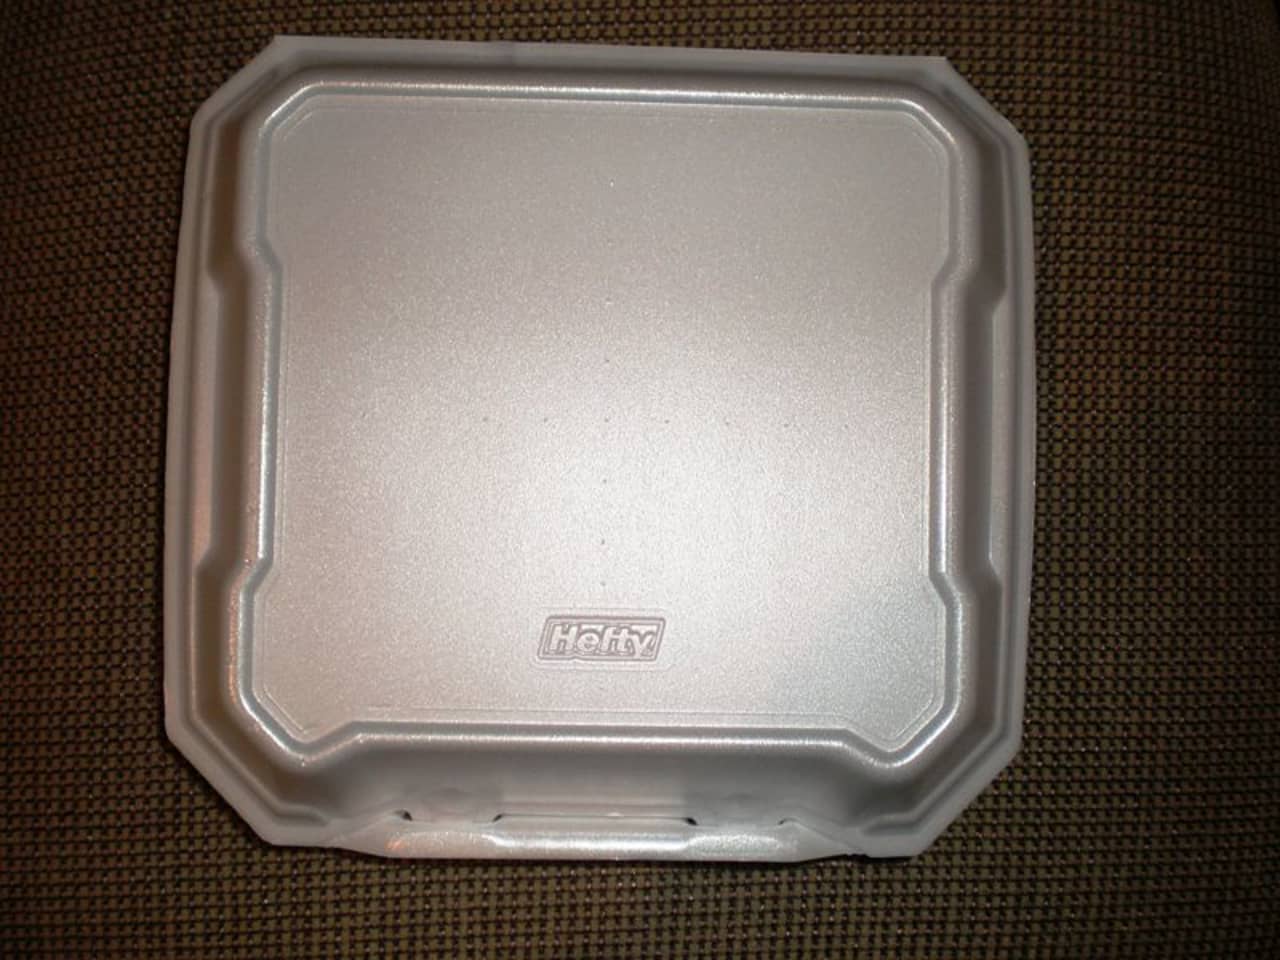 A styrofoam ban has been approved in Norwalk